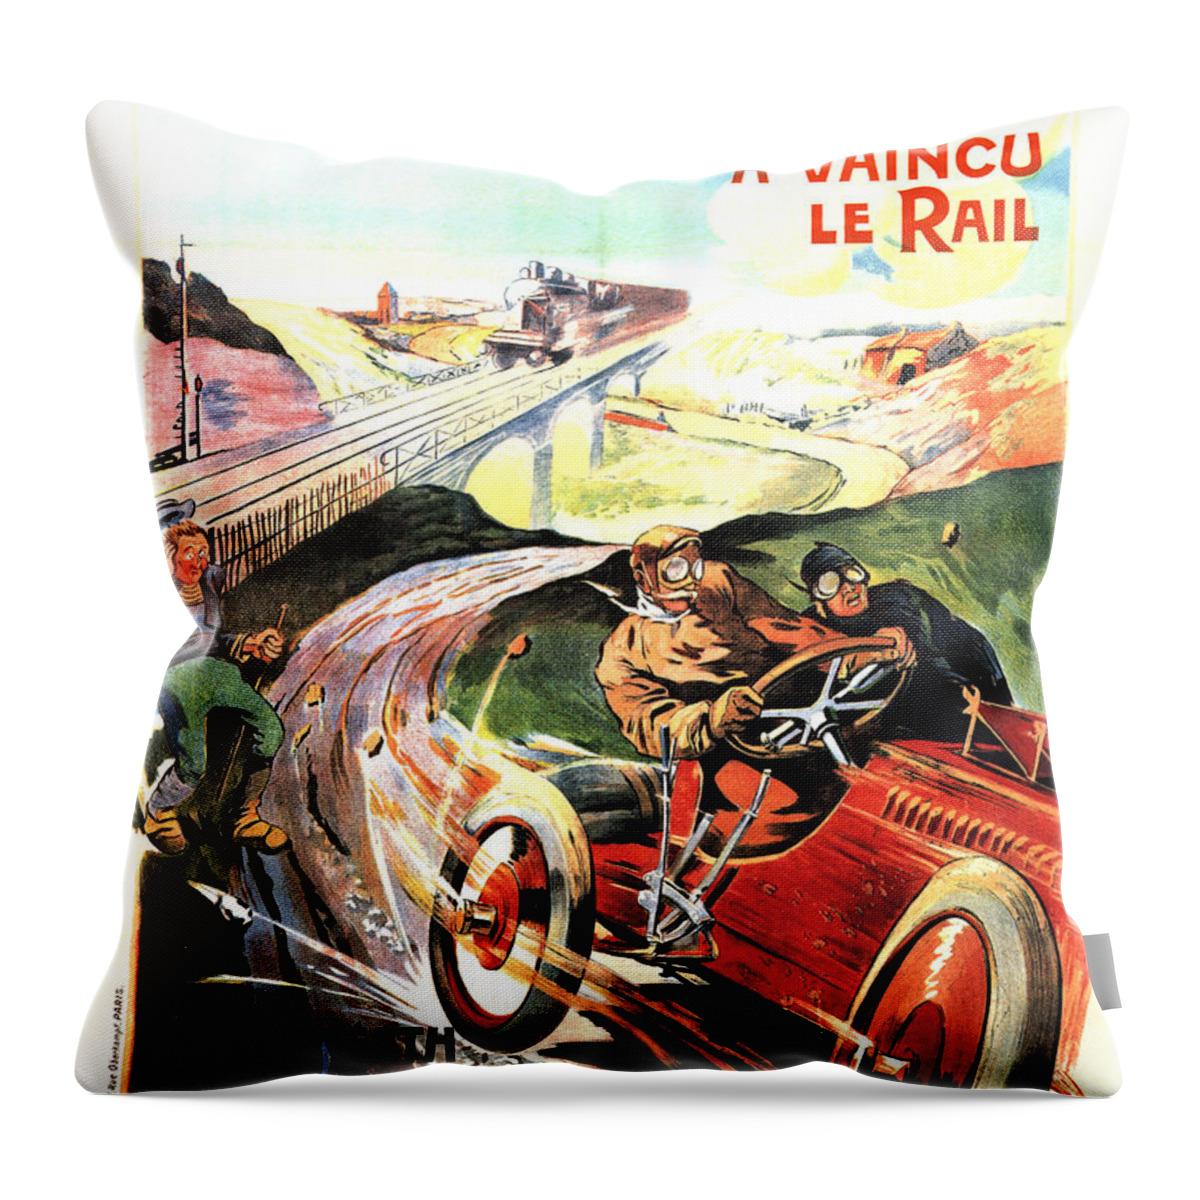 Vintage Throw Pillow featuring the mixed media Lw Pneu Michelin A Vaincu Le Rail - Vintage Tyre Advertising Poster by Studio Grafiikka